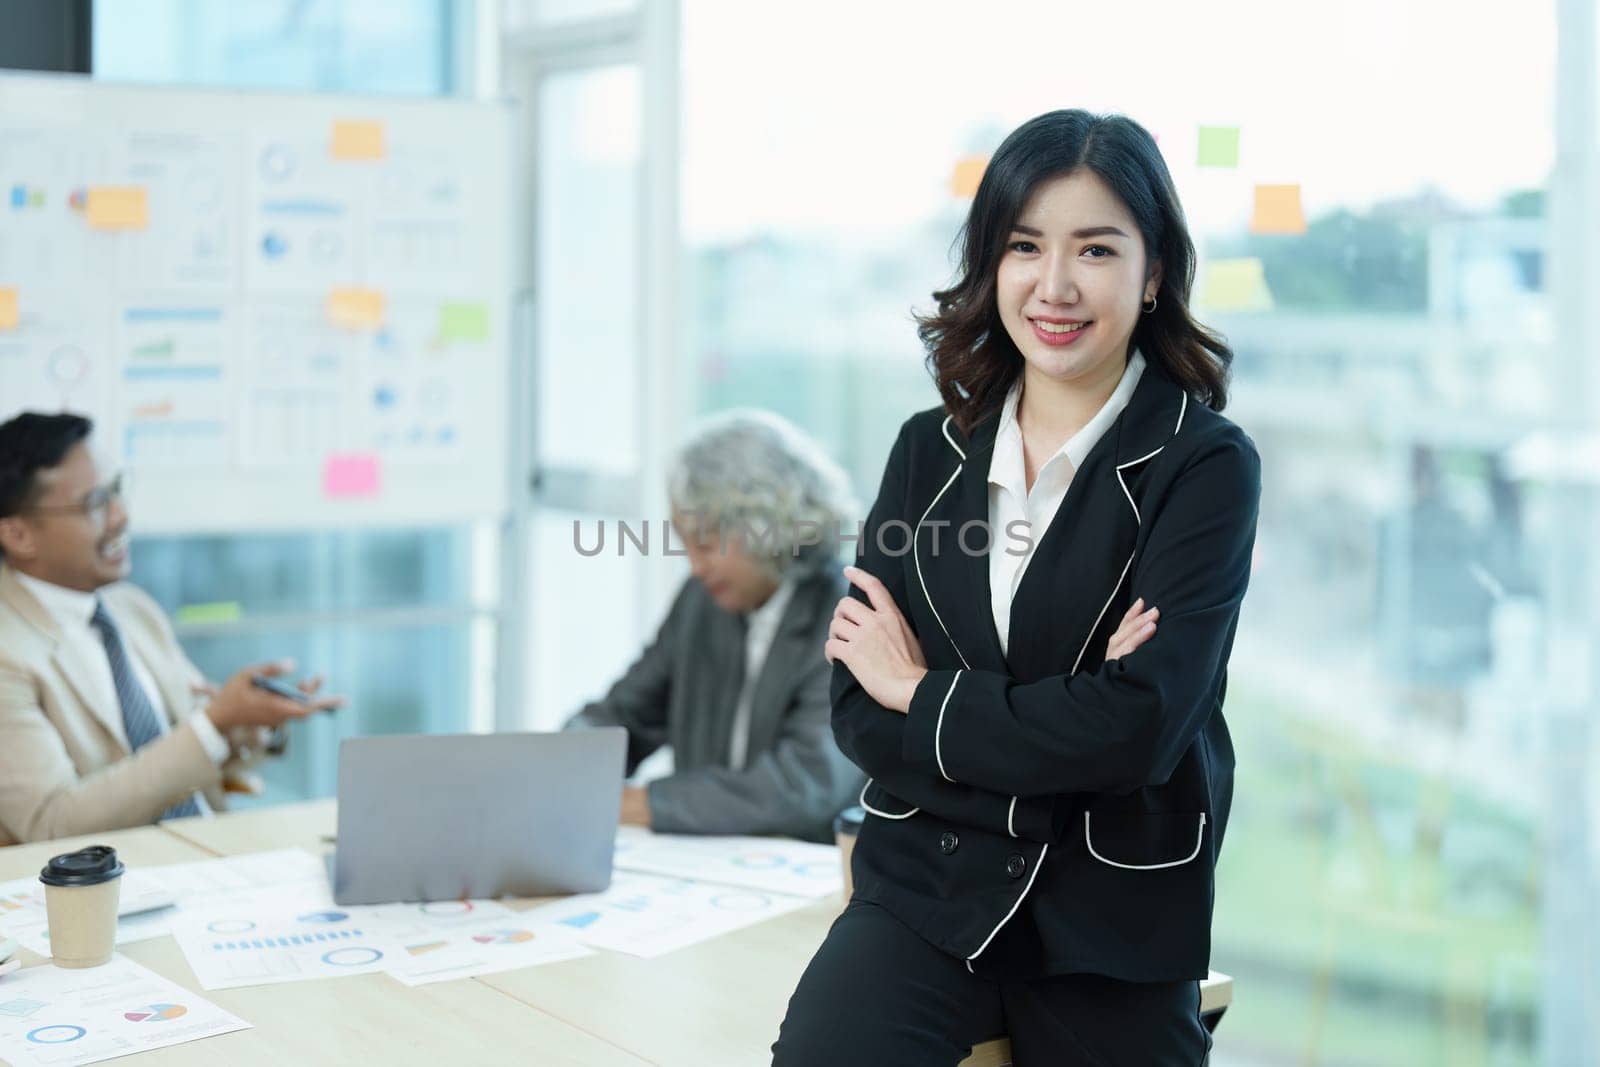 Portrait of a female business owner with a smiling face successfully invests his business in a conference room.